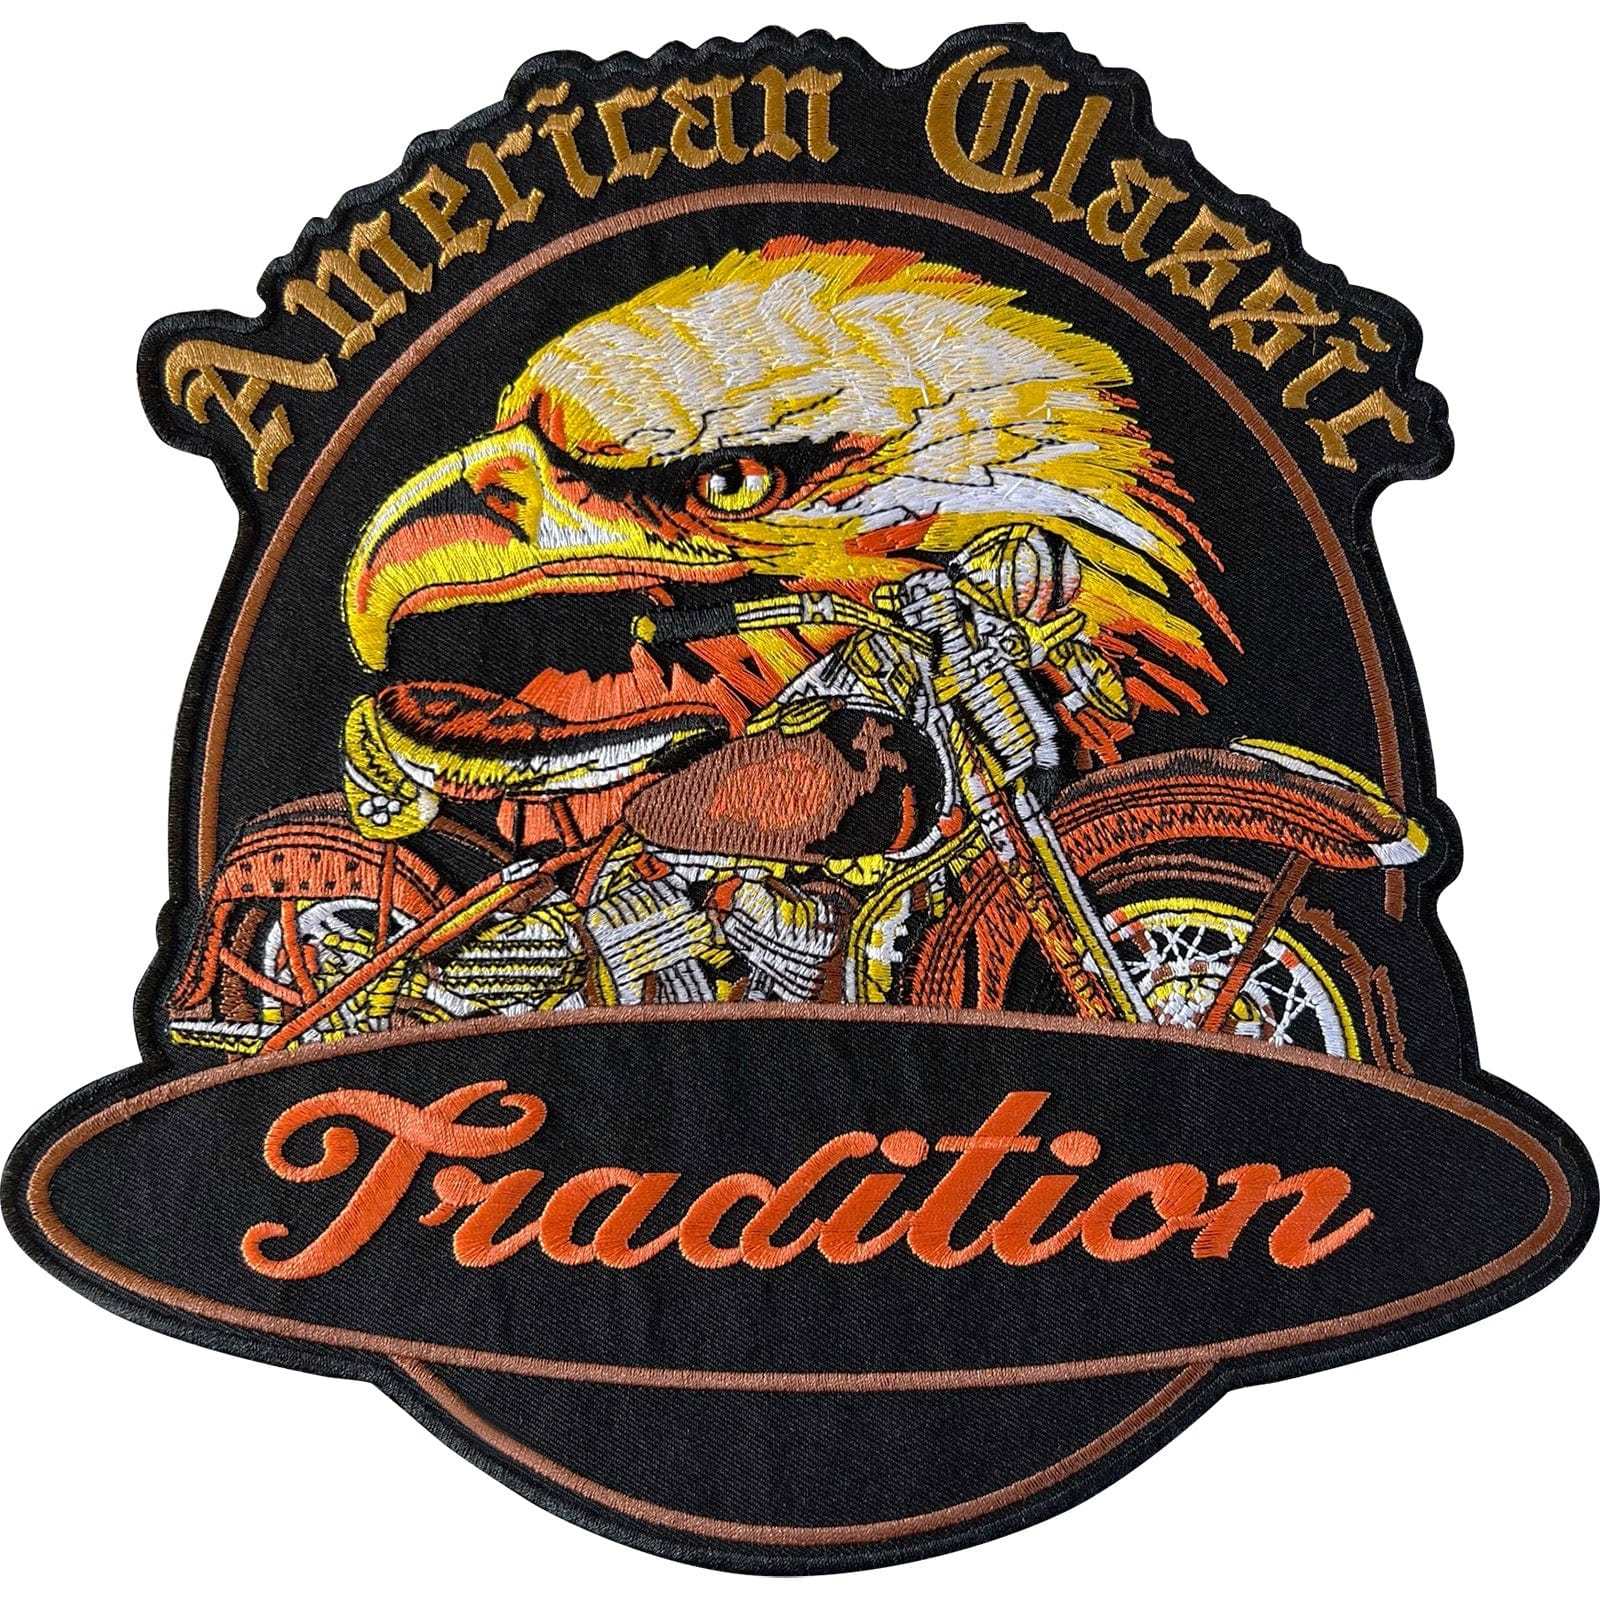 Big Large American Classic Motorcycle Jacket Patch Iron Sew On Embroidered Badge